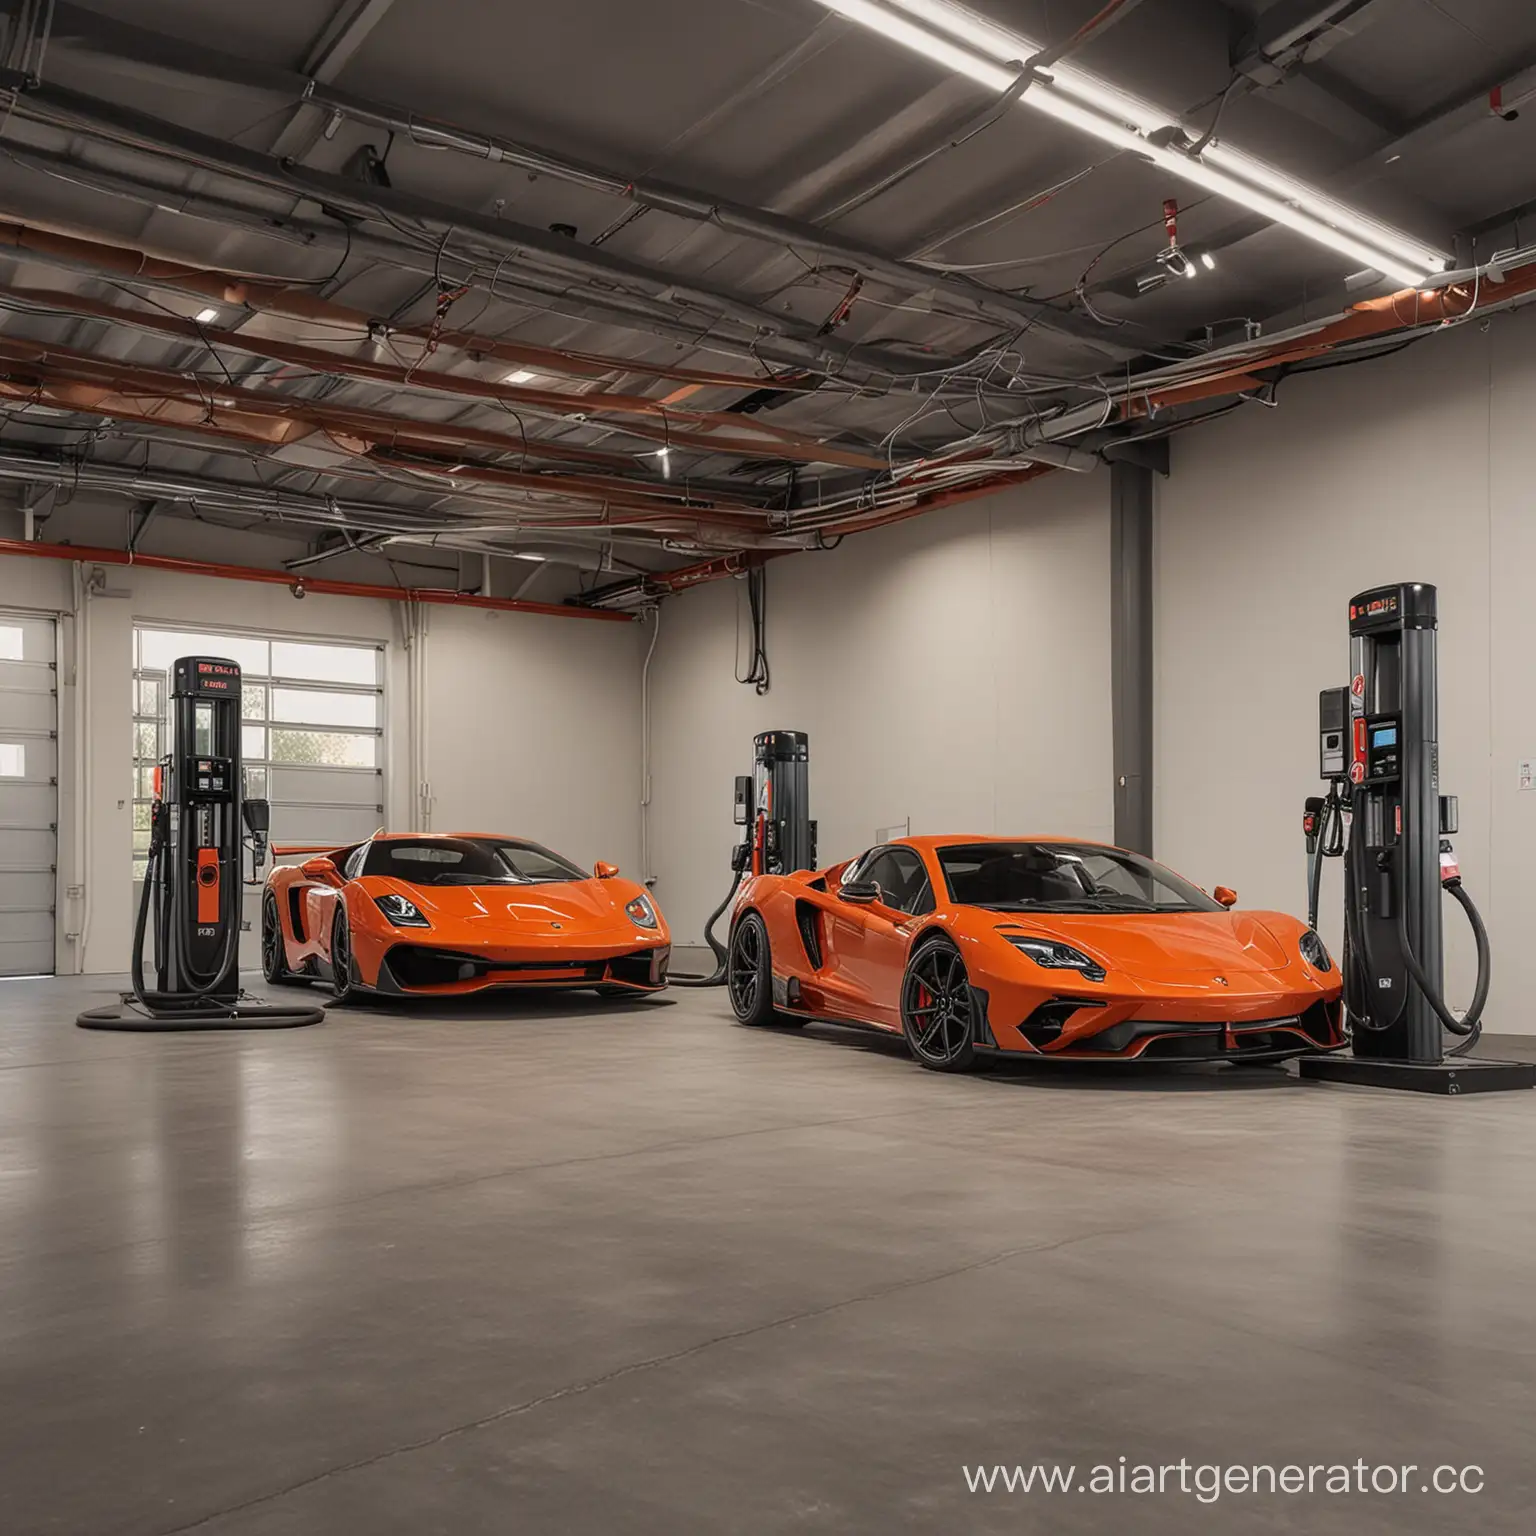 an expensive gas pump in a garage with supercars